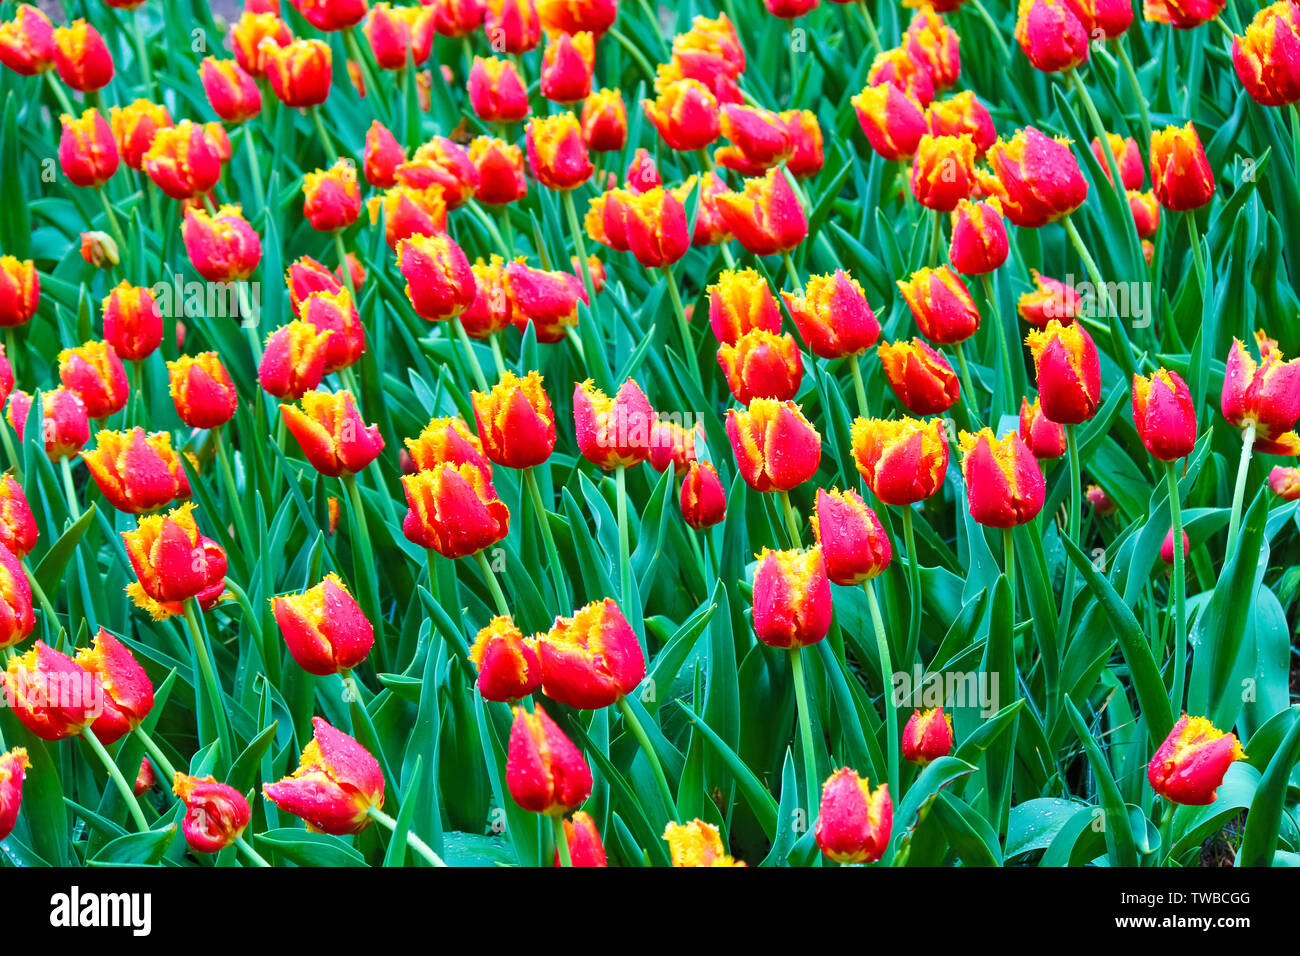 Beautiful bed of flowers with red yellow tulips. Morning dew drops on the colorful petals. Amazing flowers. Dutch tulip. Netherlands concept. Beautiful nature flowers. Stock Photo